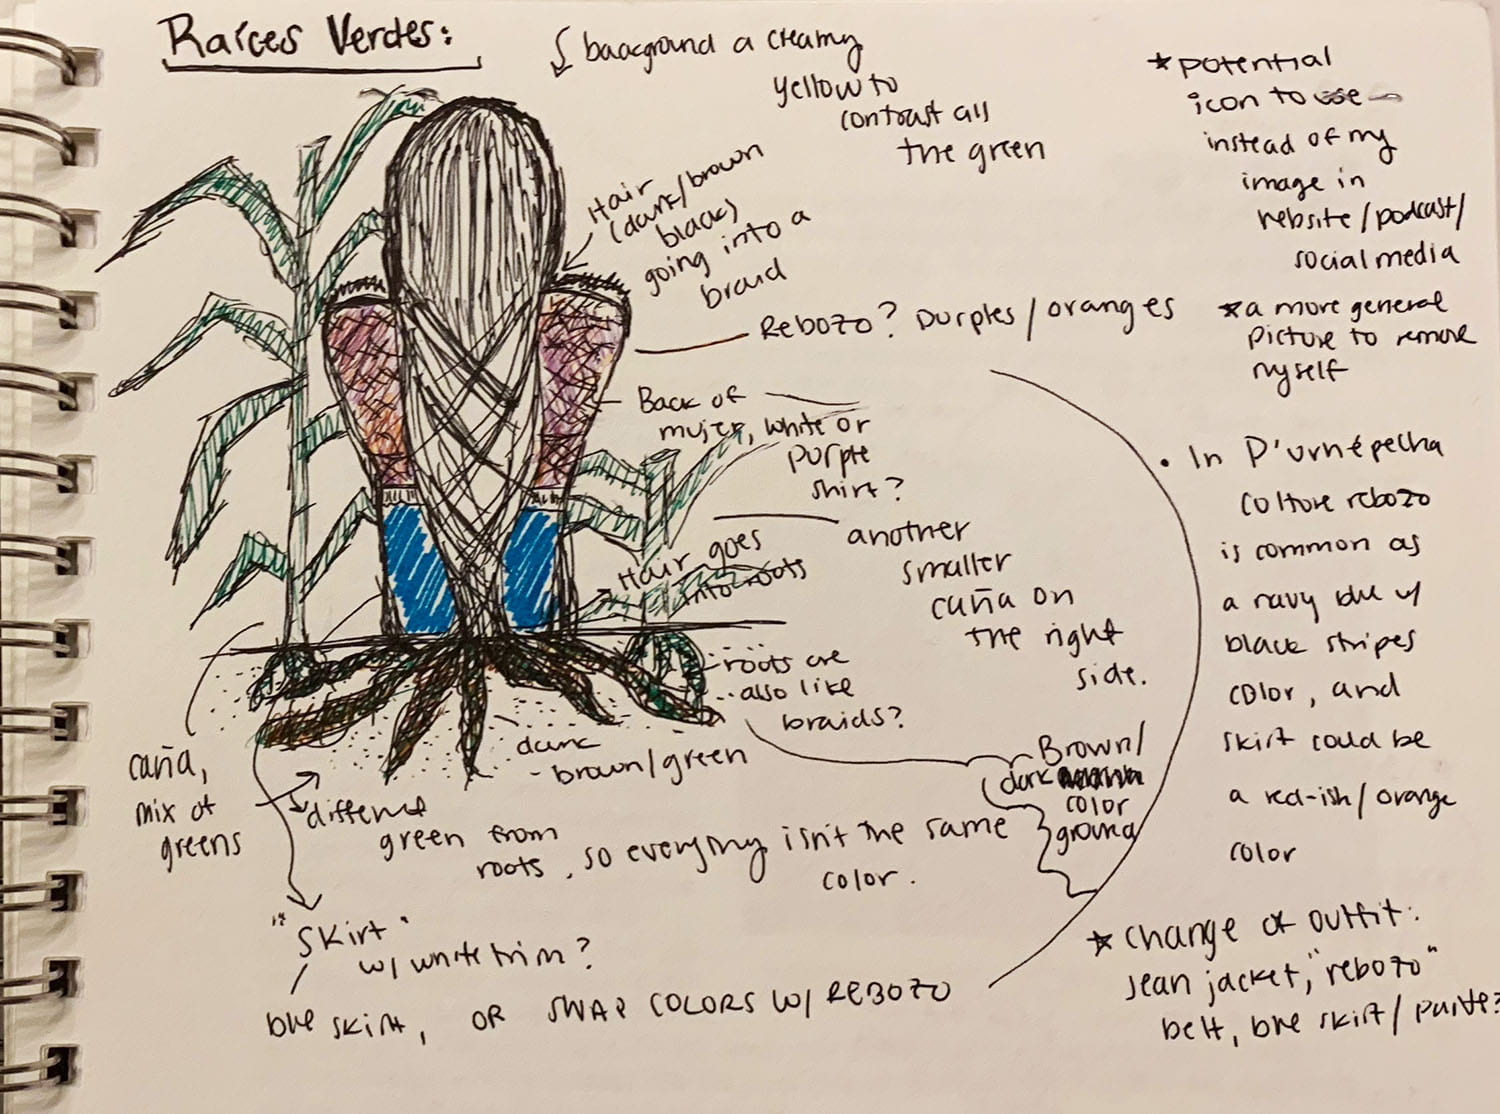 colored ink illustration of plant life, with lots of notes, titled Raices Verdes